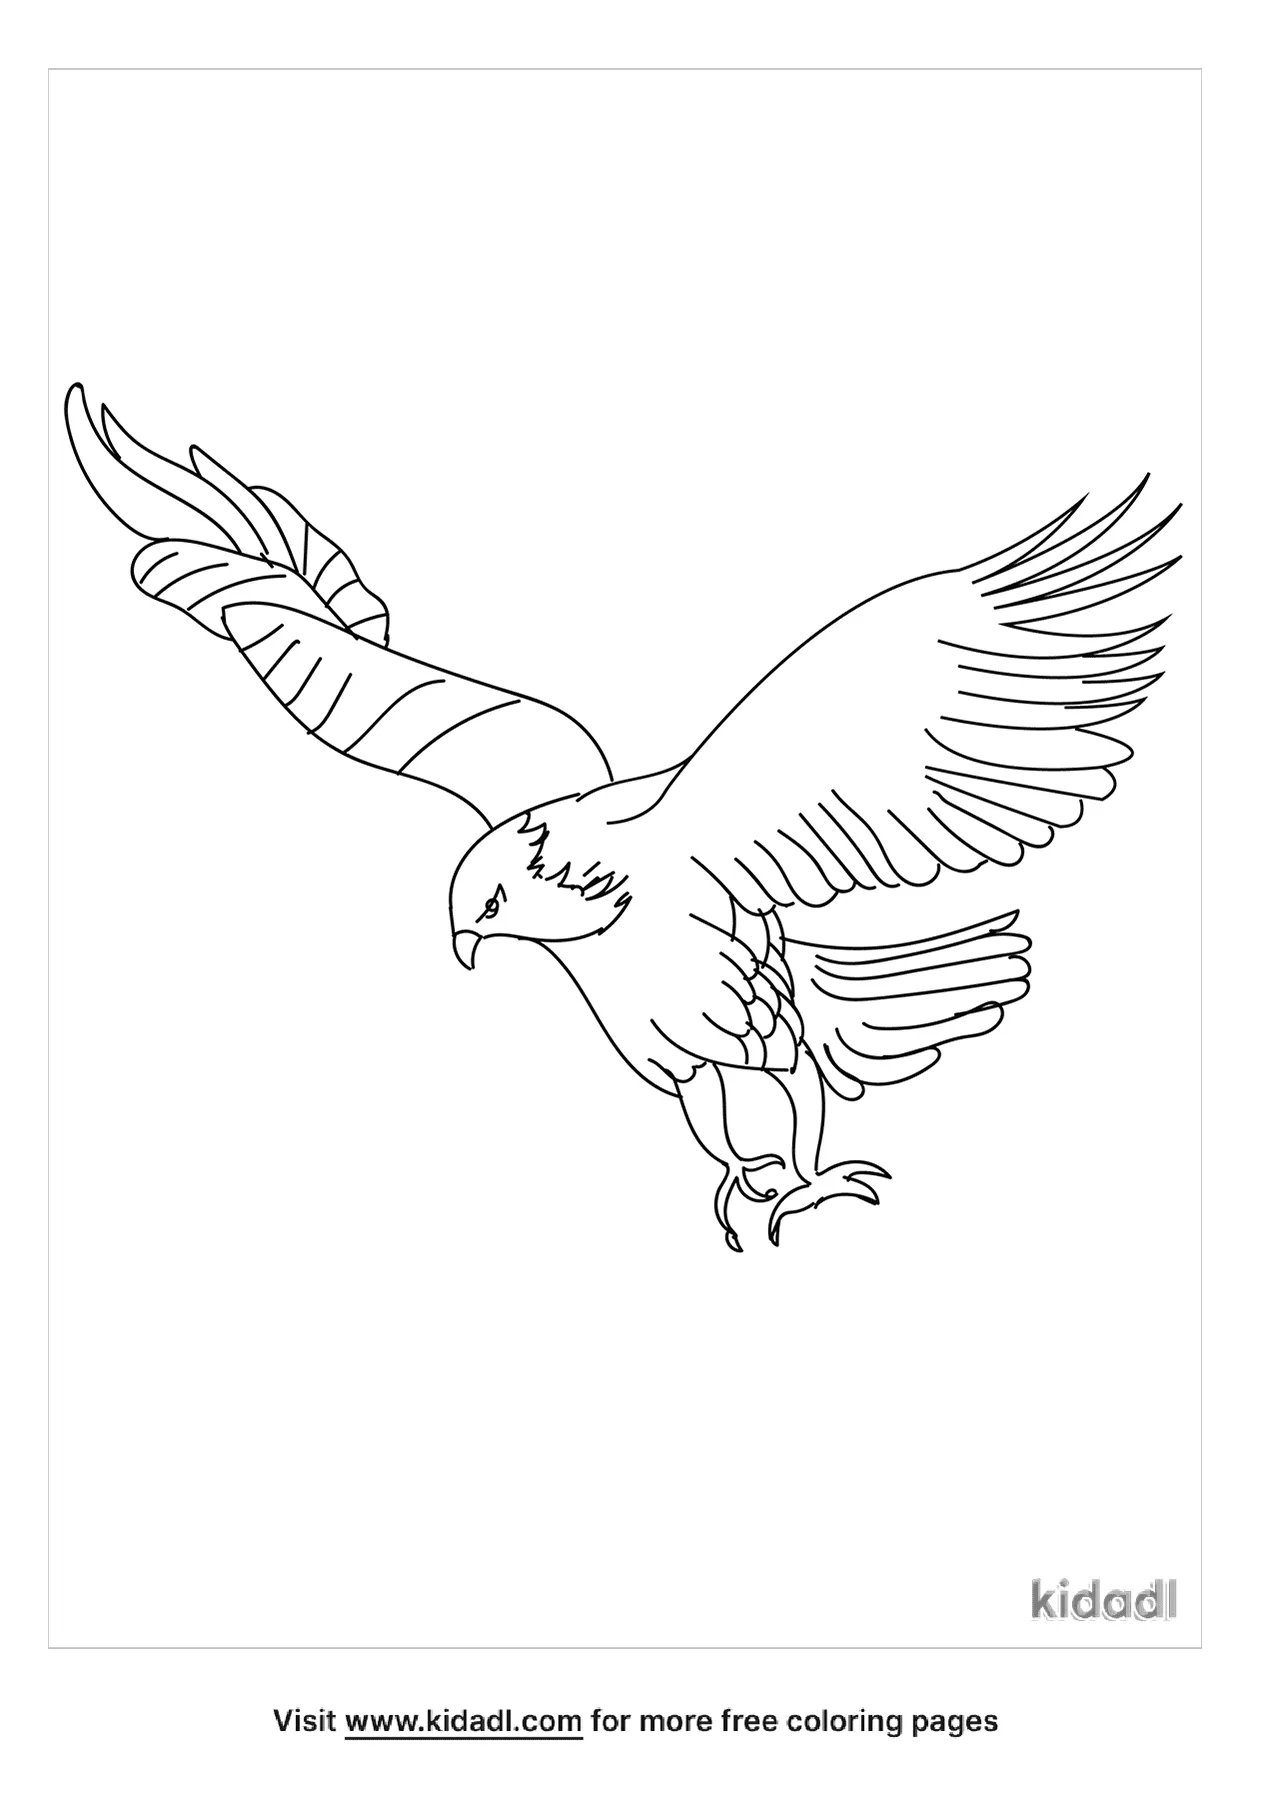 Hawk Coloring Pages Free Birds Coloring Pages Kidadl